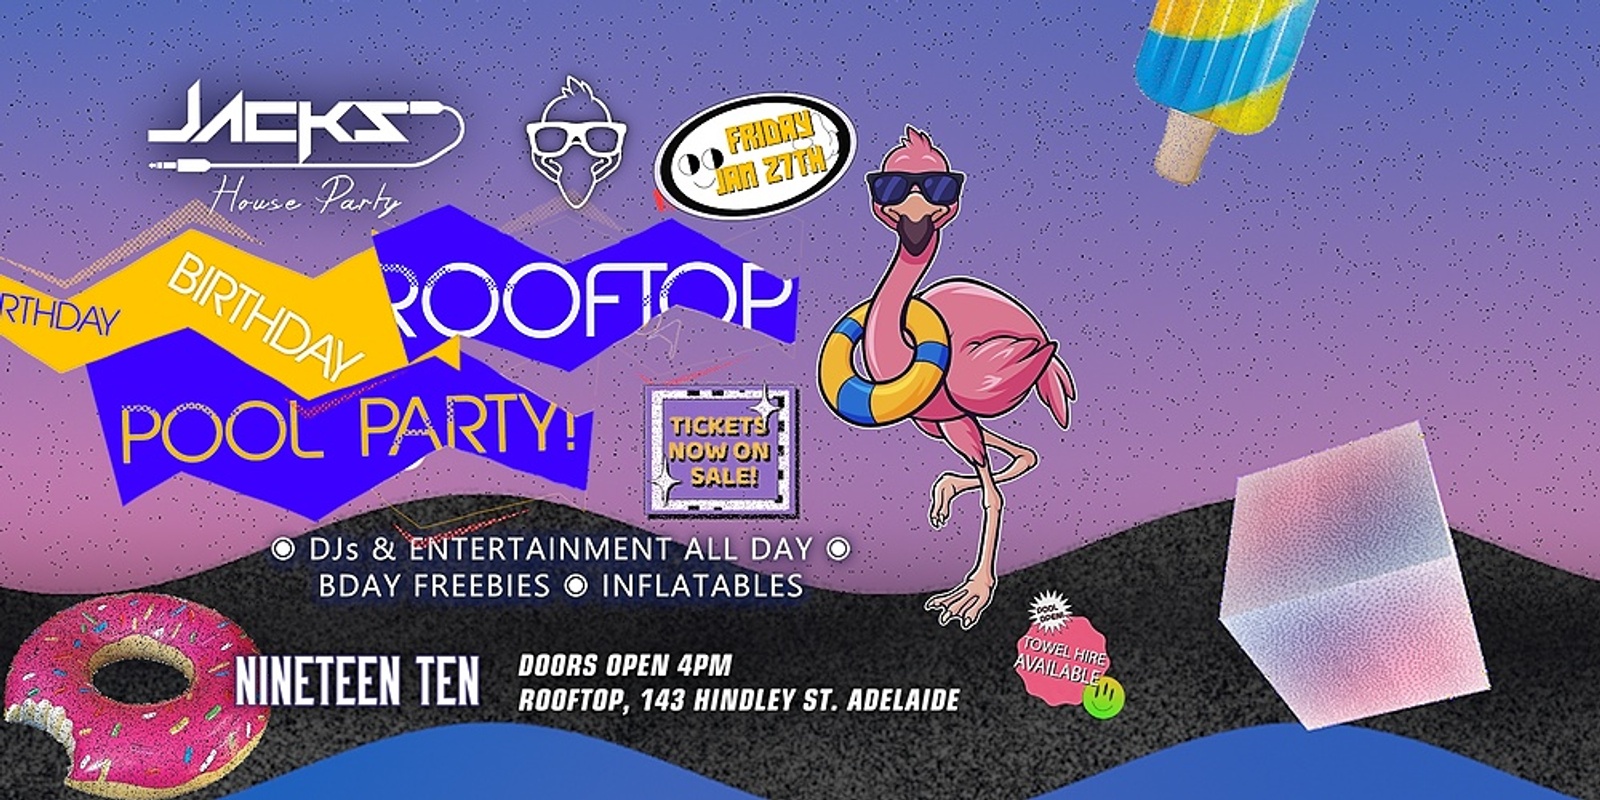 Banner image for Jacks House Party 1st Birthday Rooftop Pool Party!